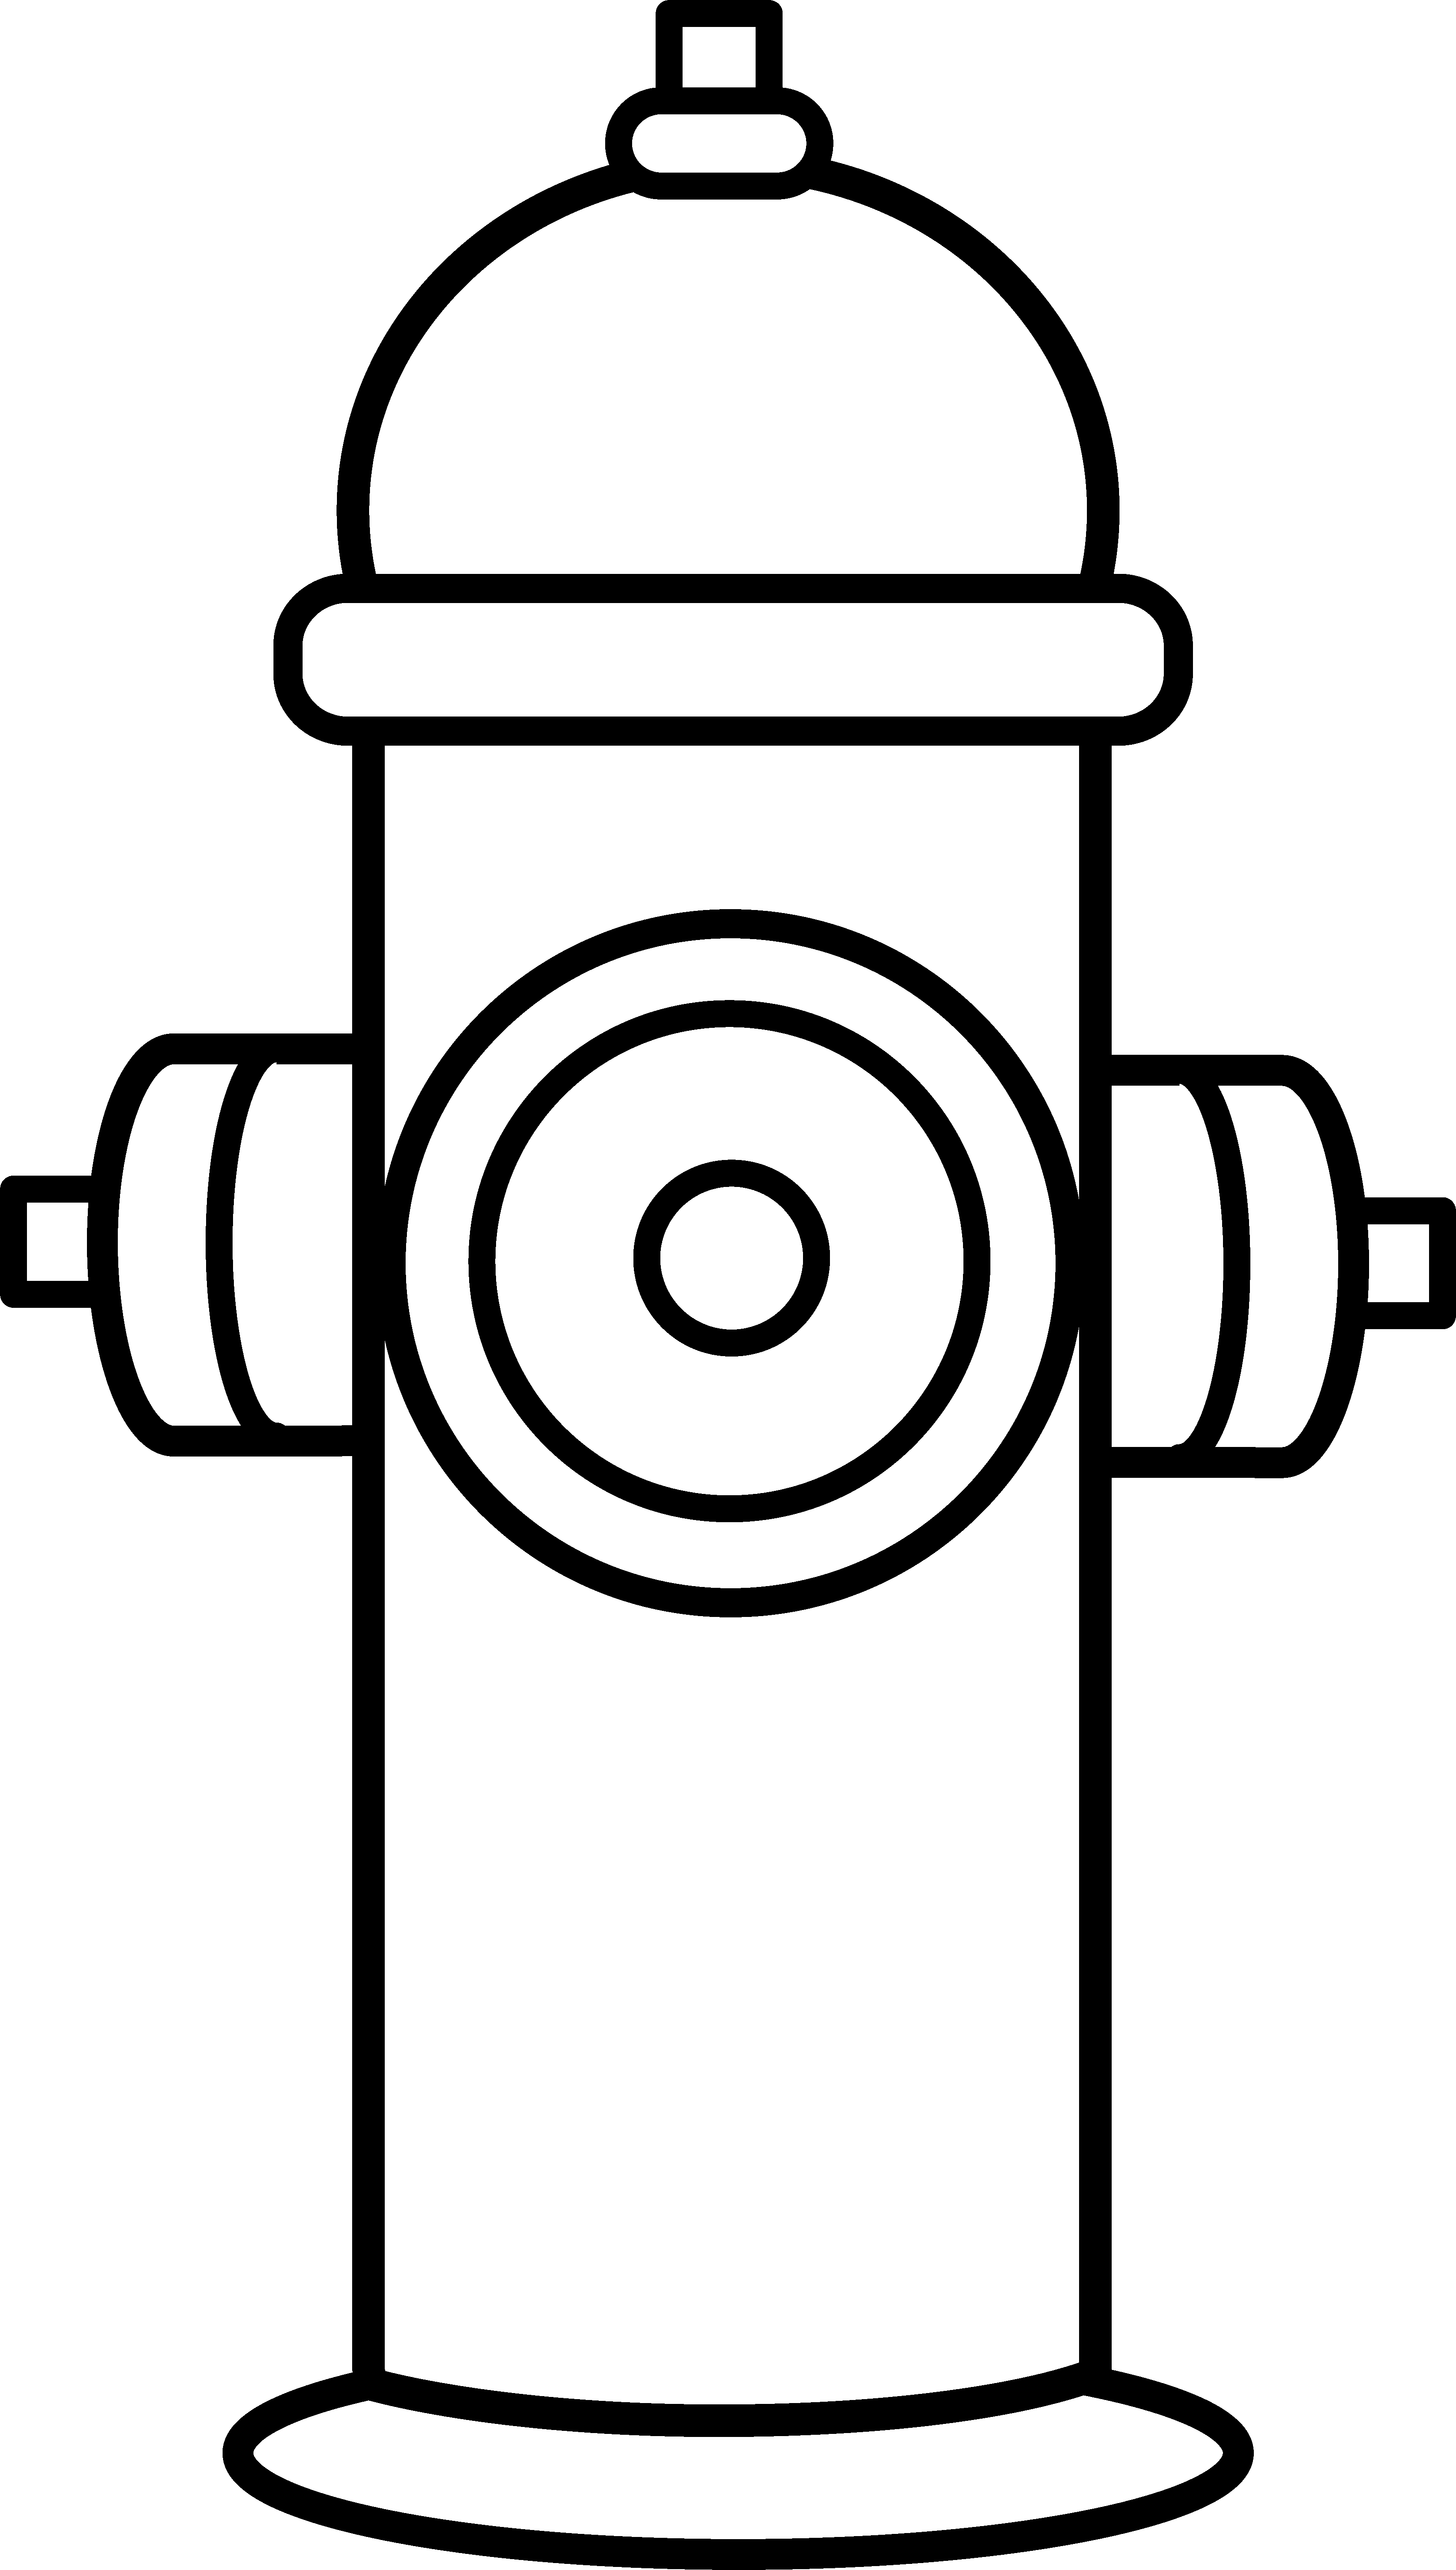 Hydrant coloring page free. Clipart fire black and white